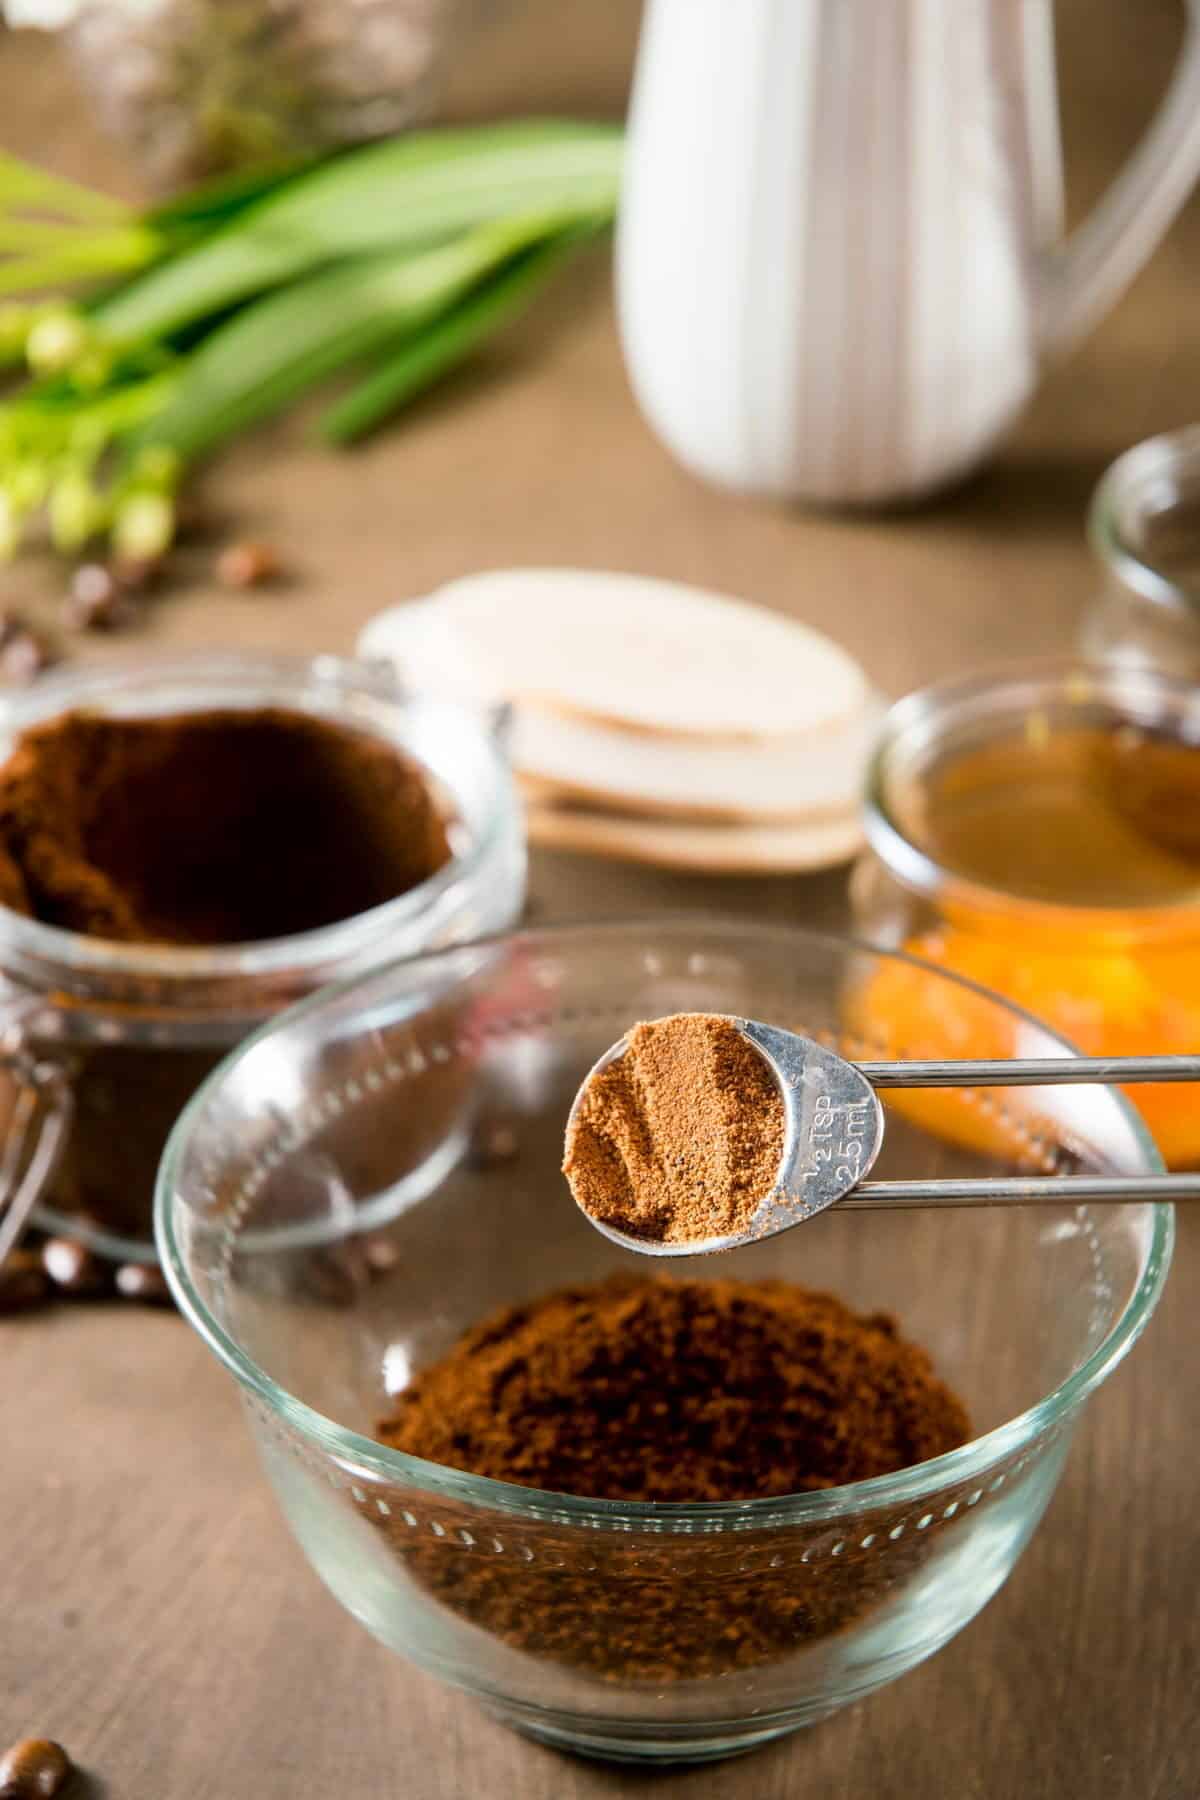 Pumpkin pie spice in a measuring spoon over a small bowl of coffee grind.